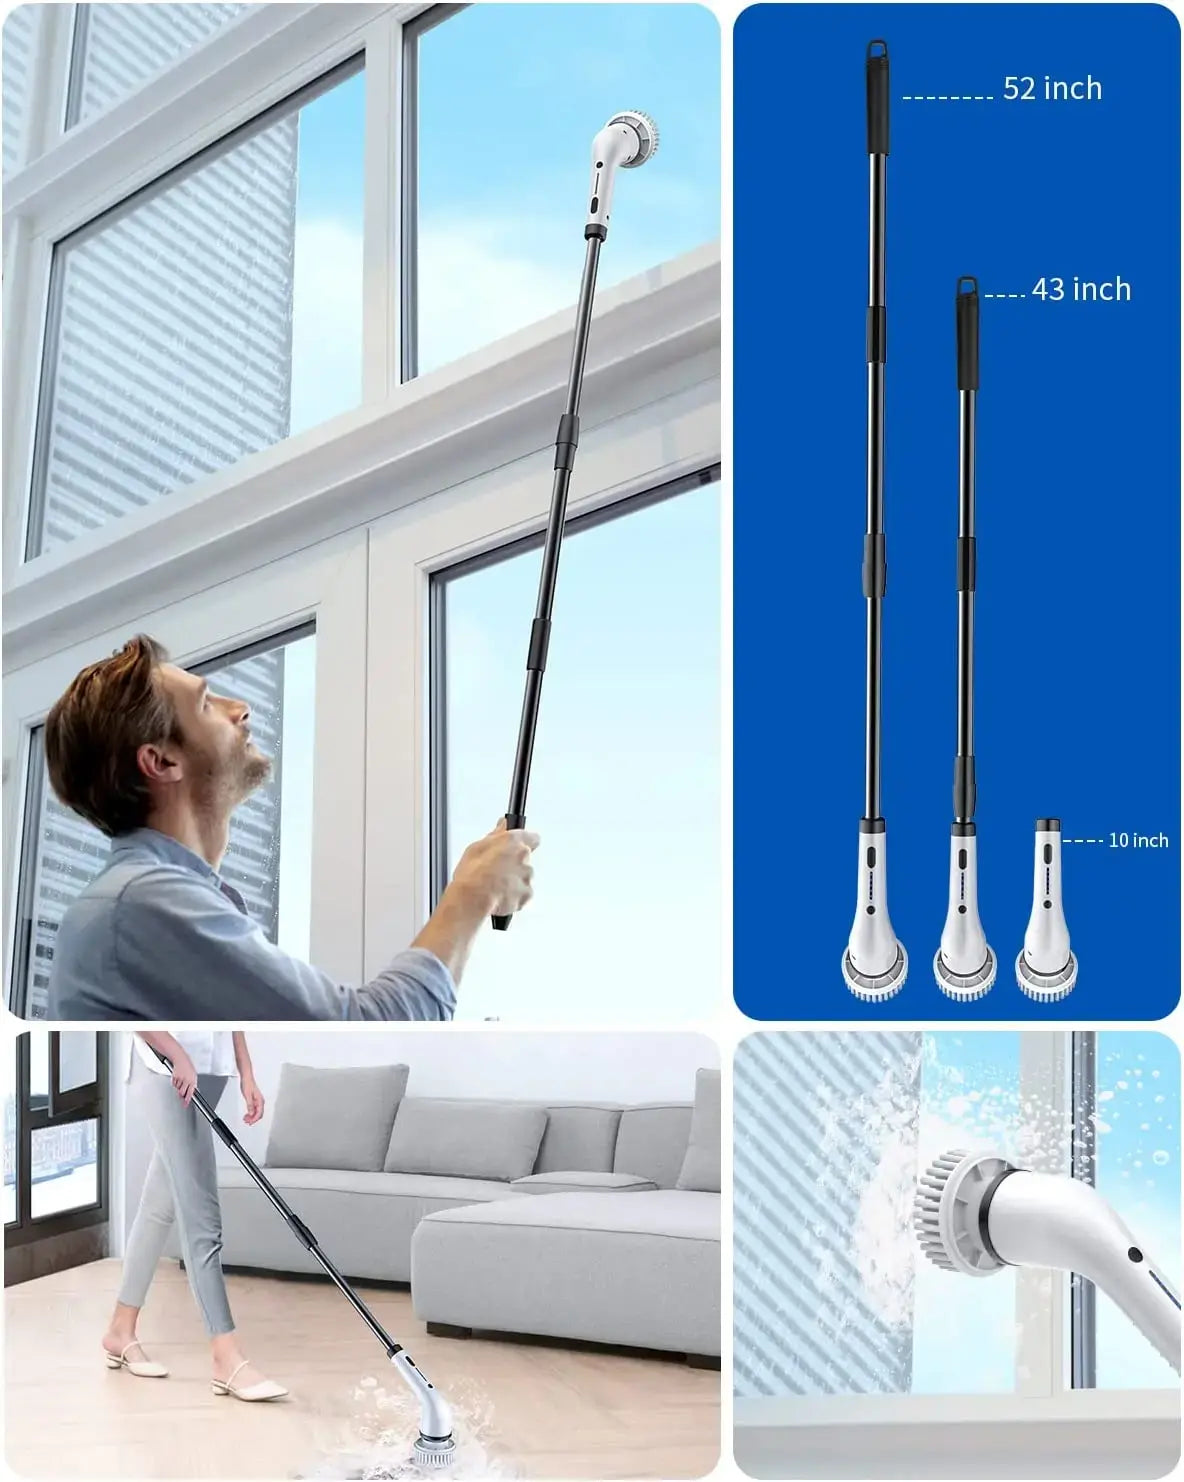 8-in-1 USB Electric Cleaning Brush